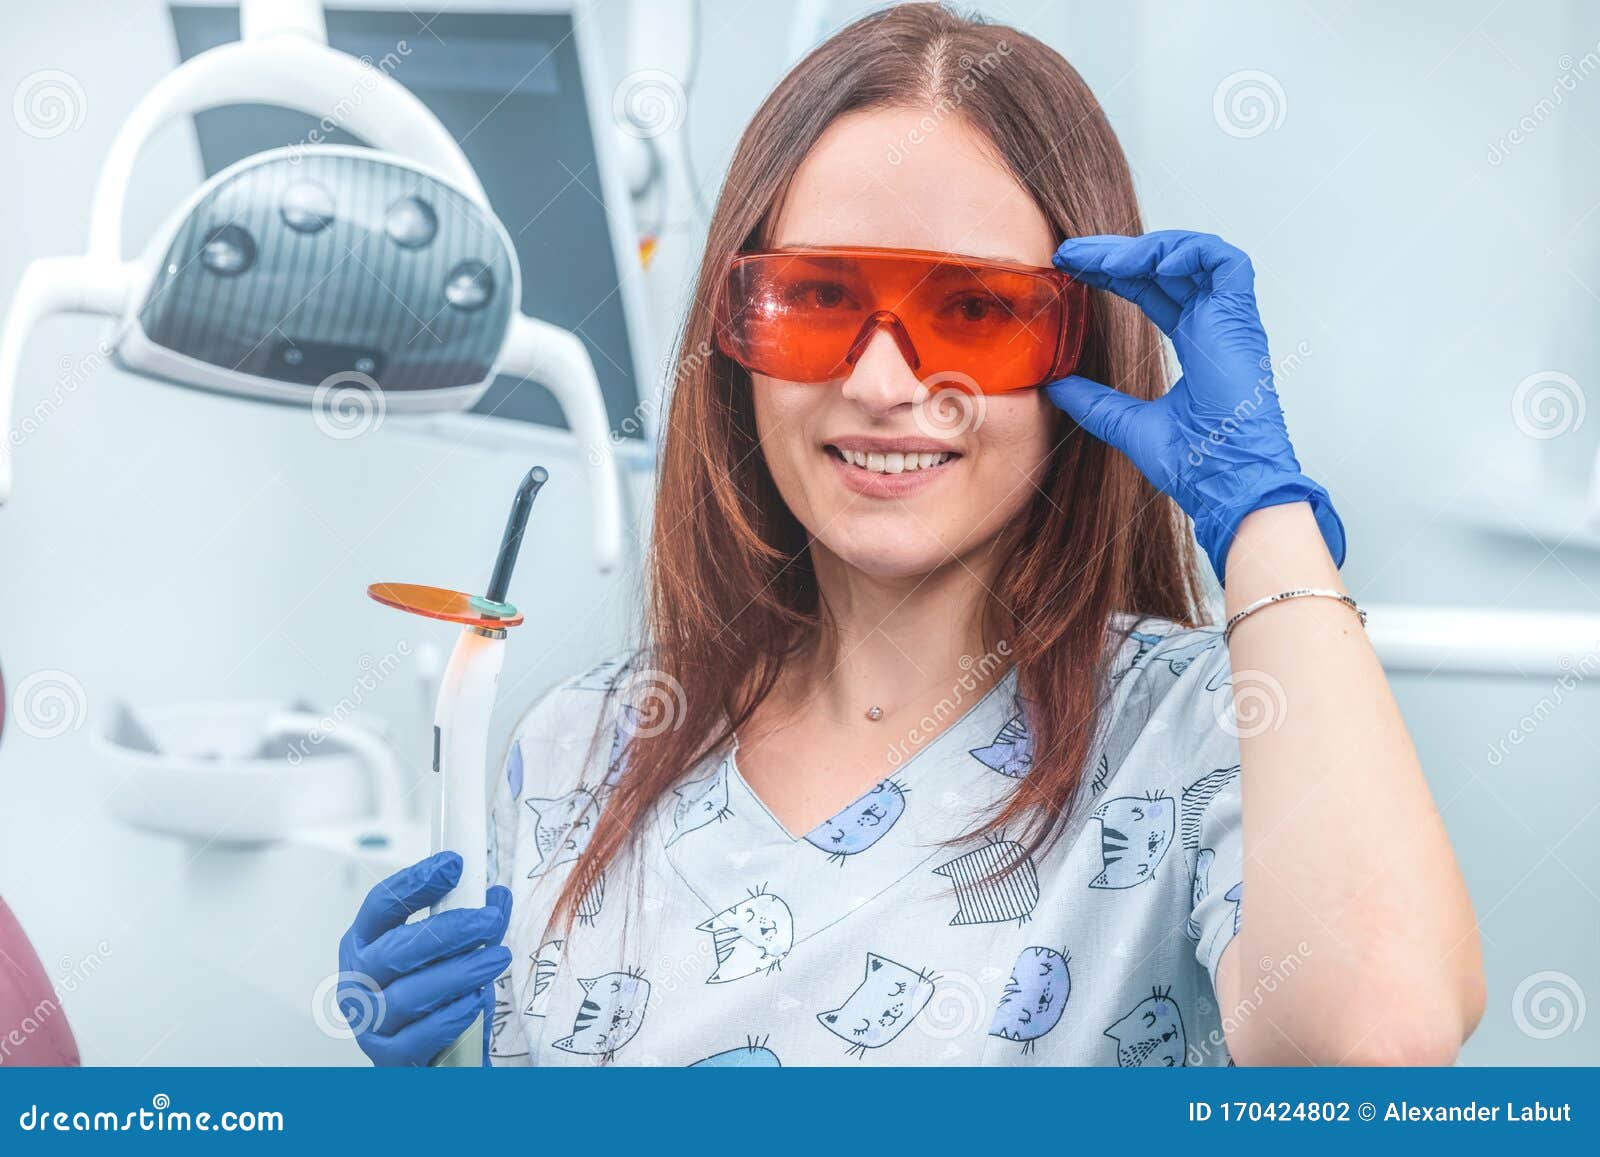 Dental magnifying glasses: What should you consider when choosing